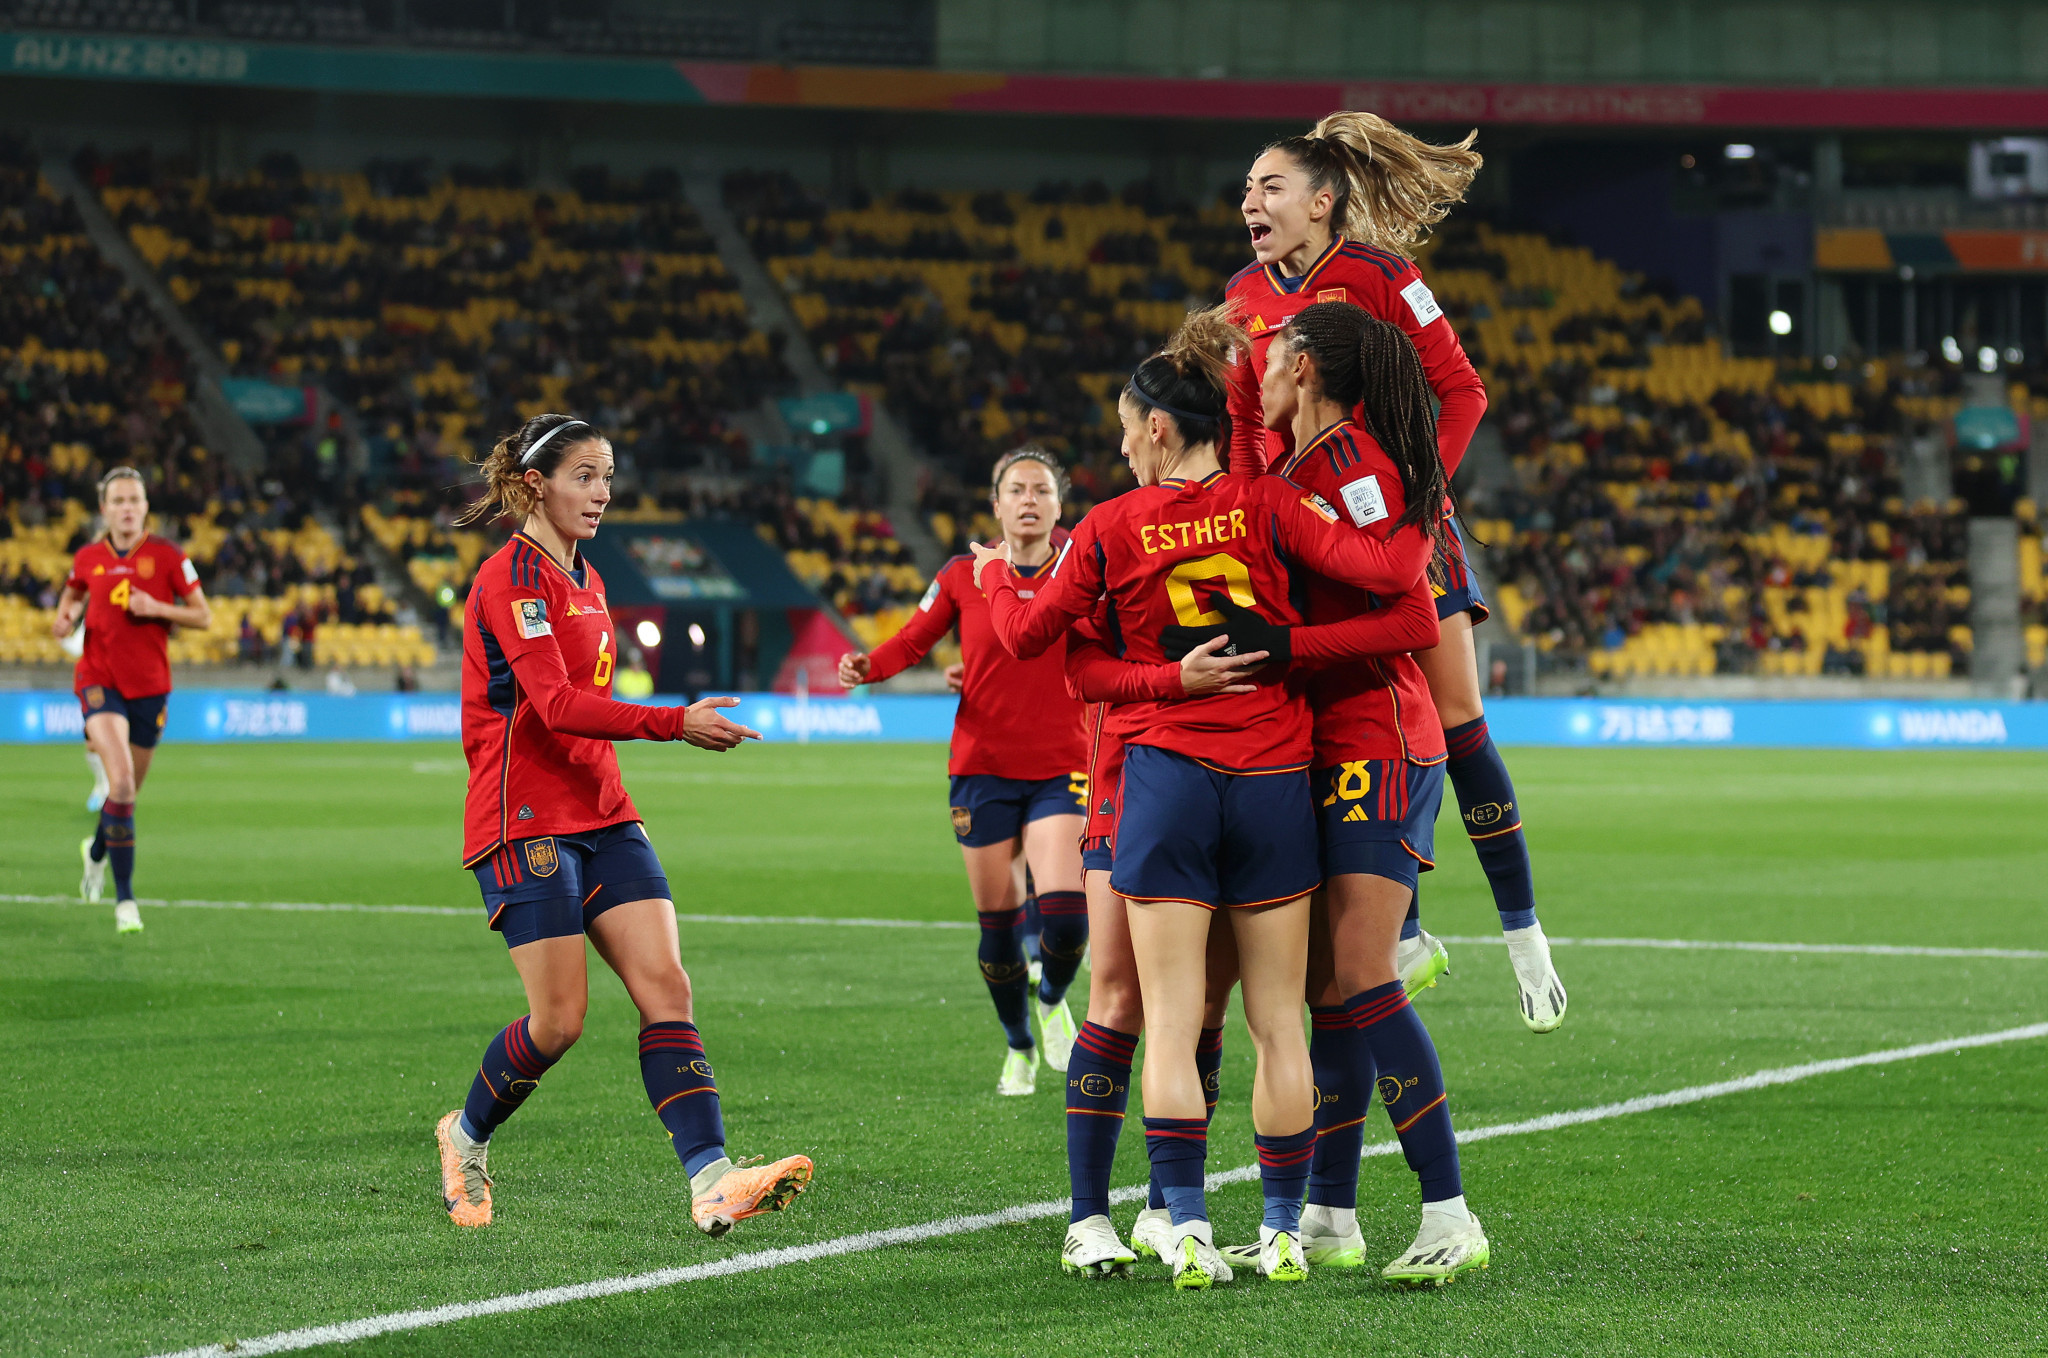 Spain have been tipped to go deep into the FIFA Women's World Cup, and started with a routine 3-0 win against Costa Rica ©Getty Images